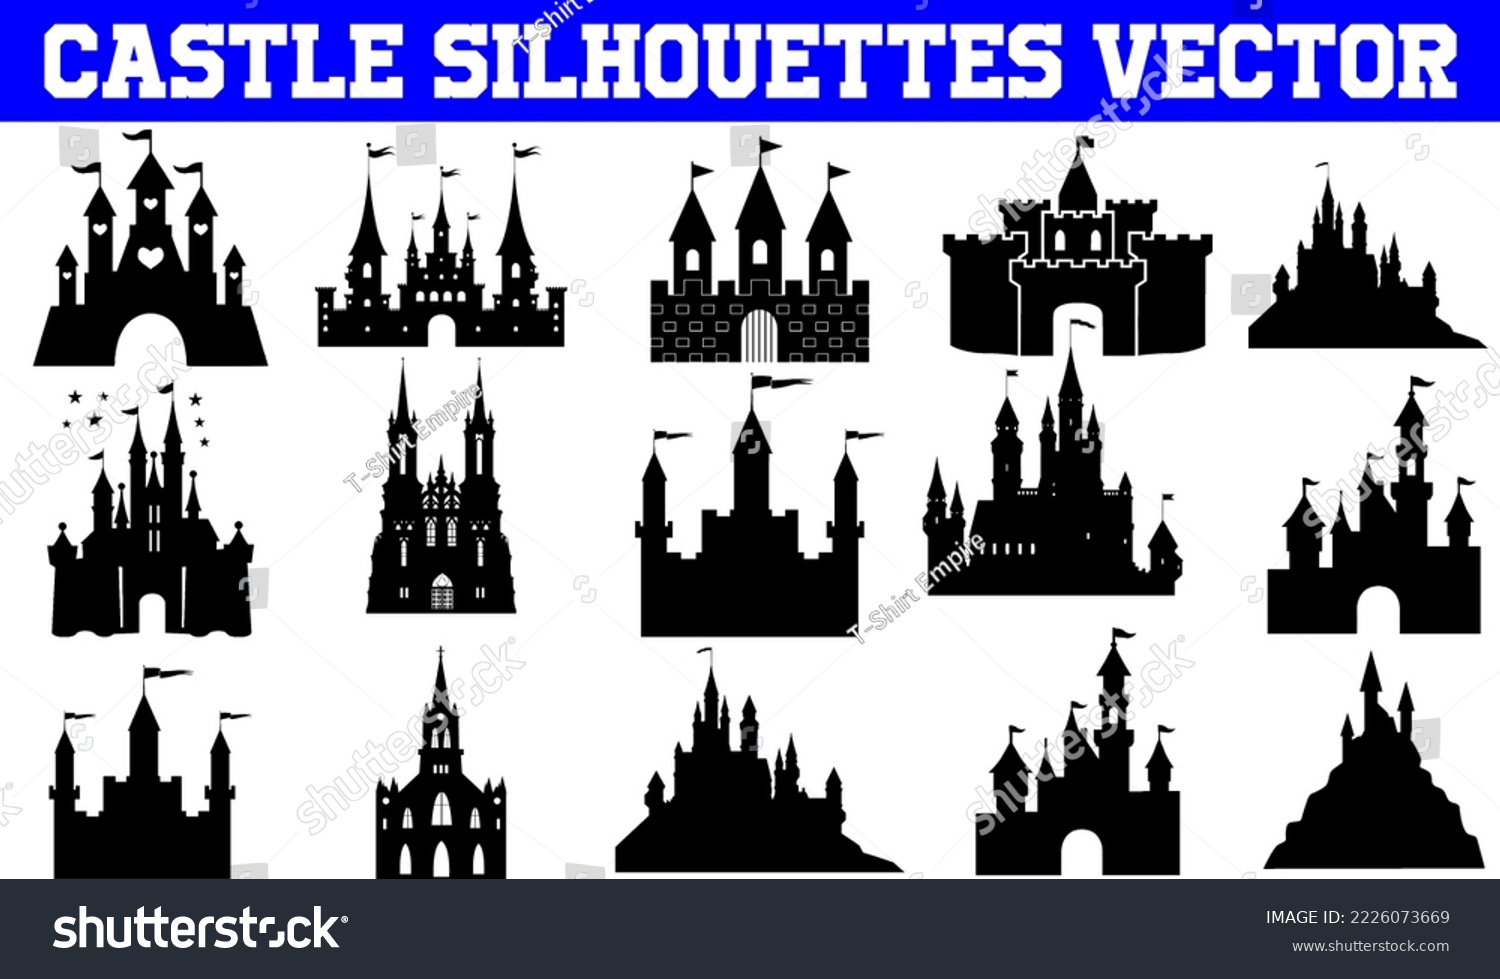 SVG of Castle Silhouettes Vector | Castle SVG | Clipart | Graphic | Cutting files for Cricut, Silhouette
 svg